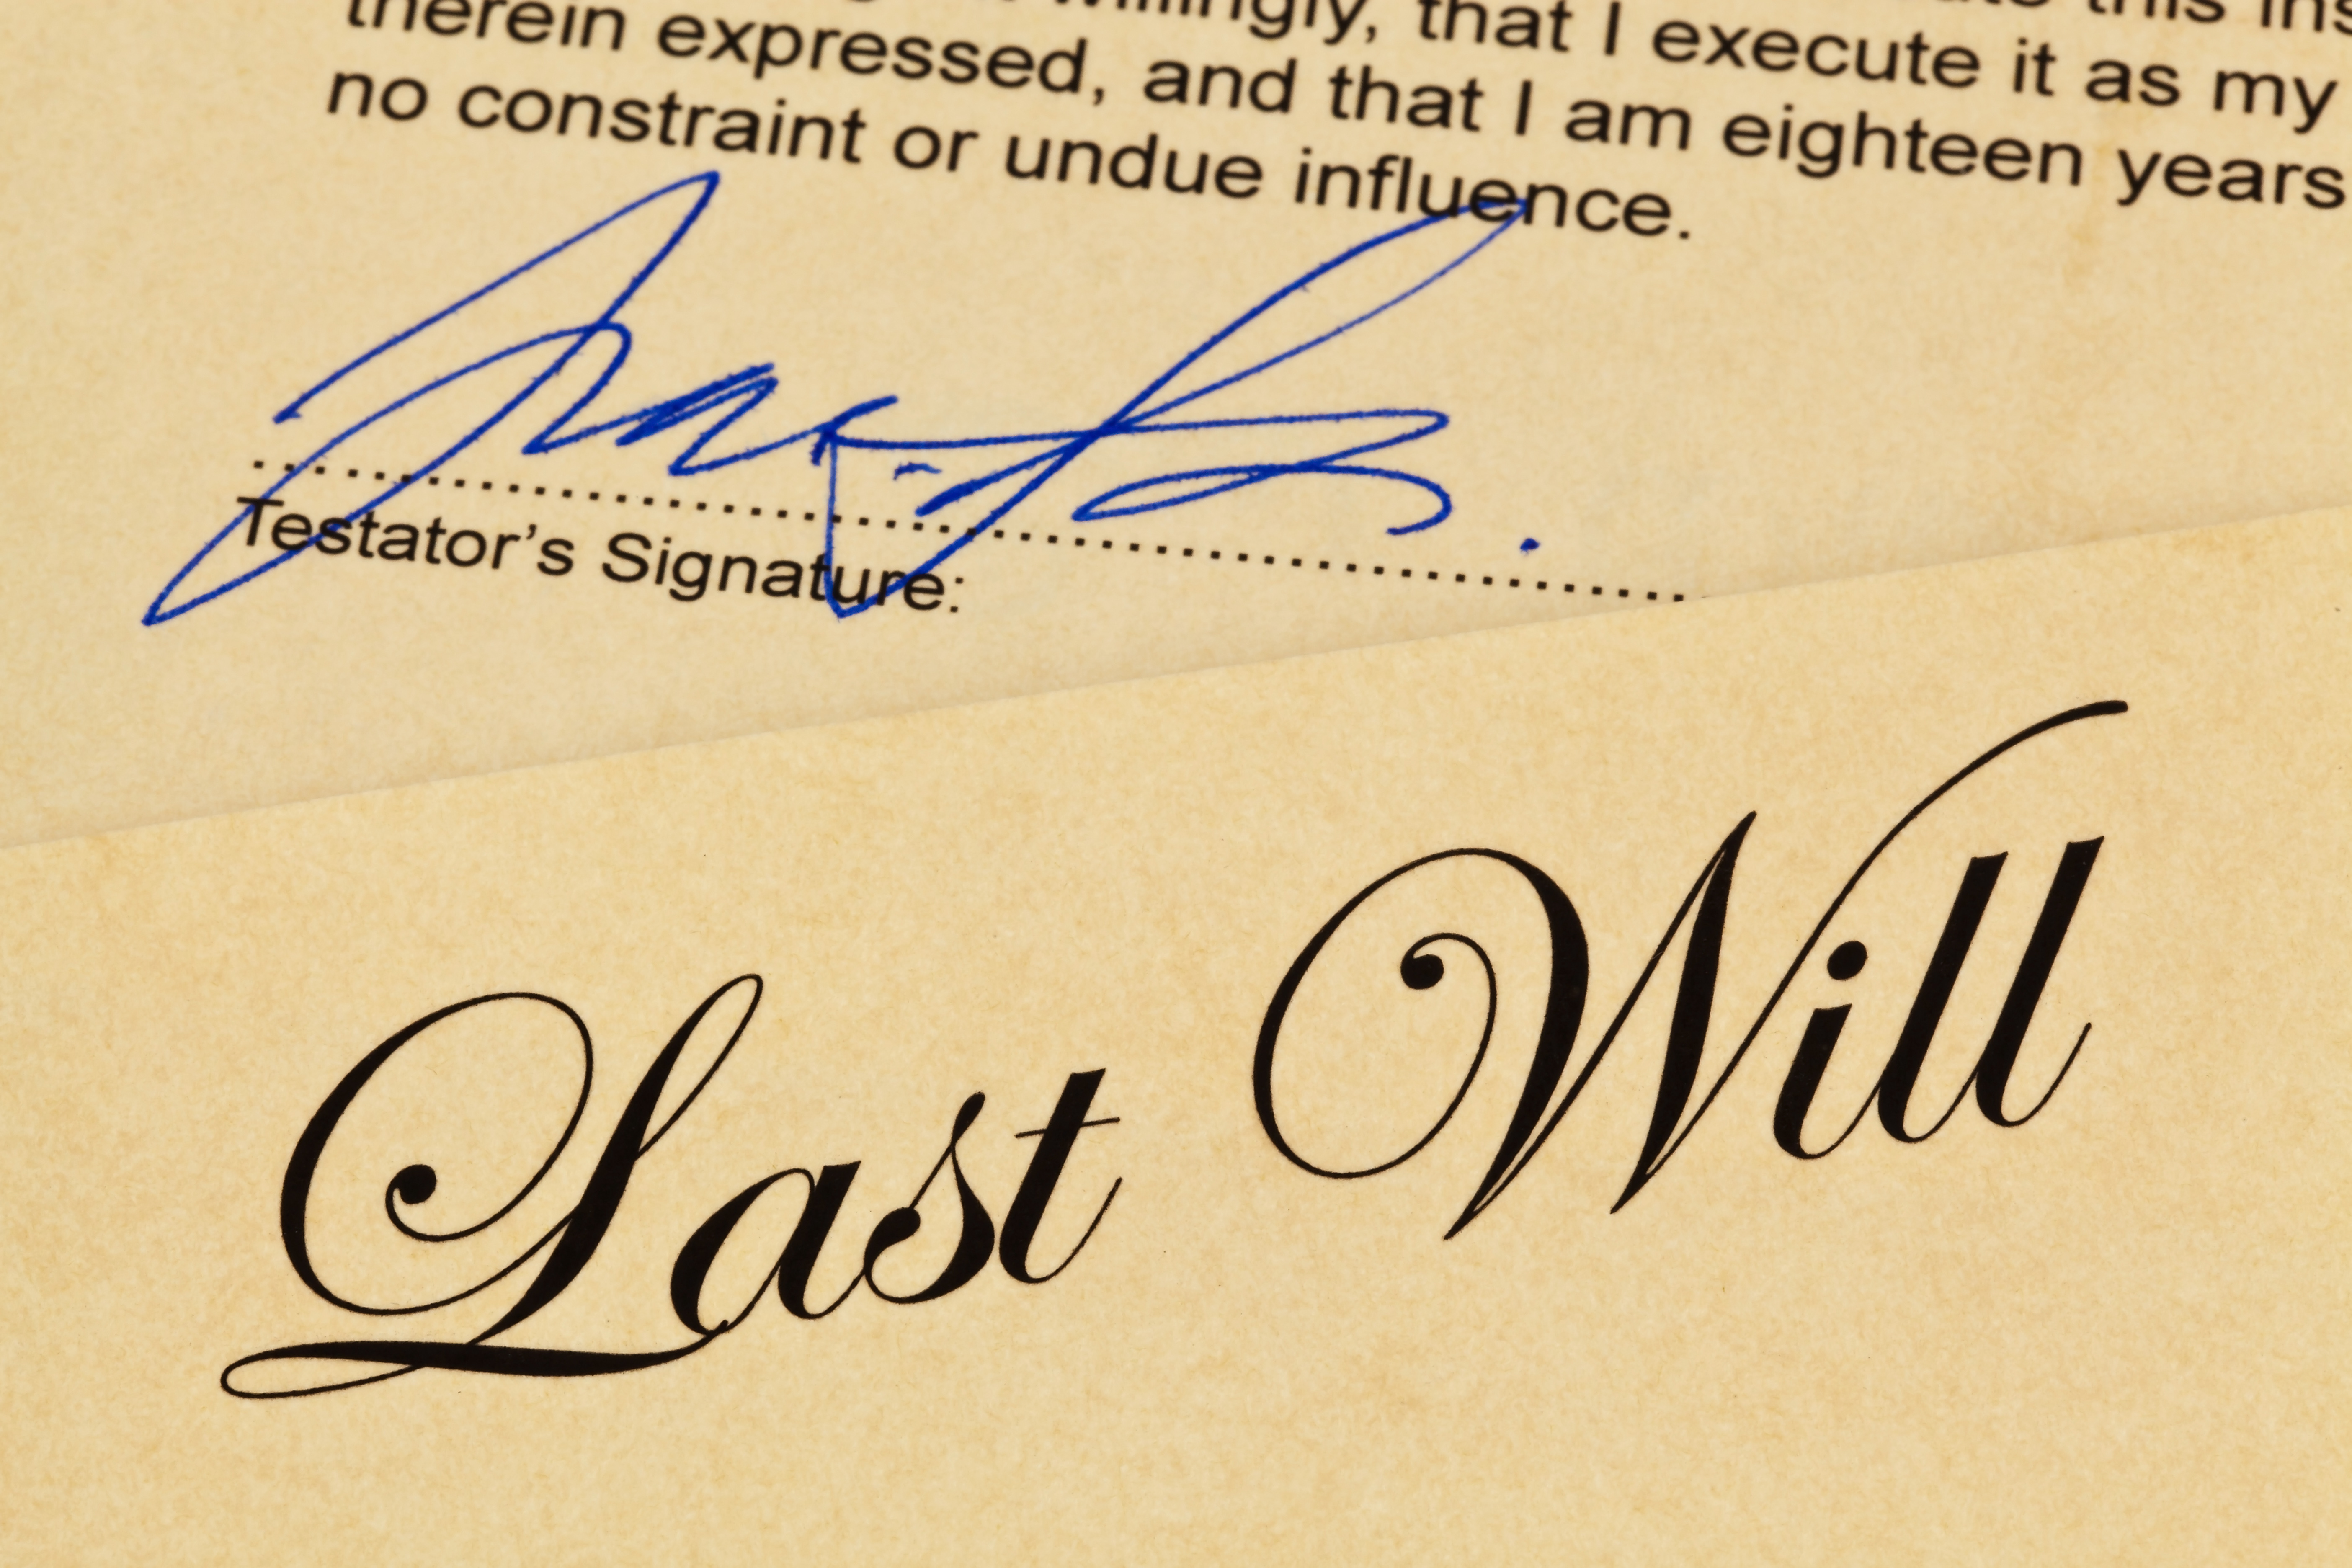 Signature on last will and testament | Source: Shutterstock